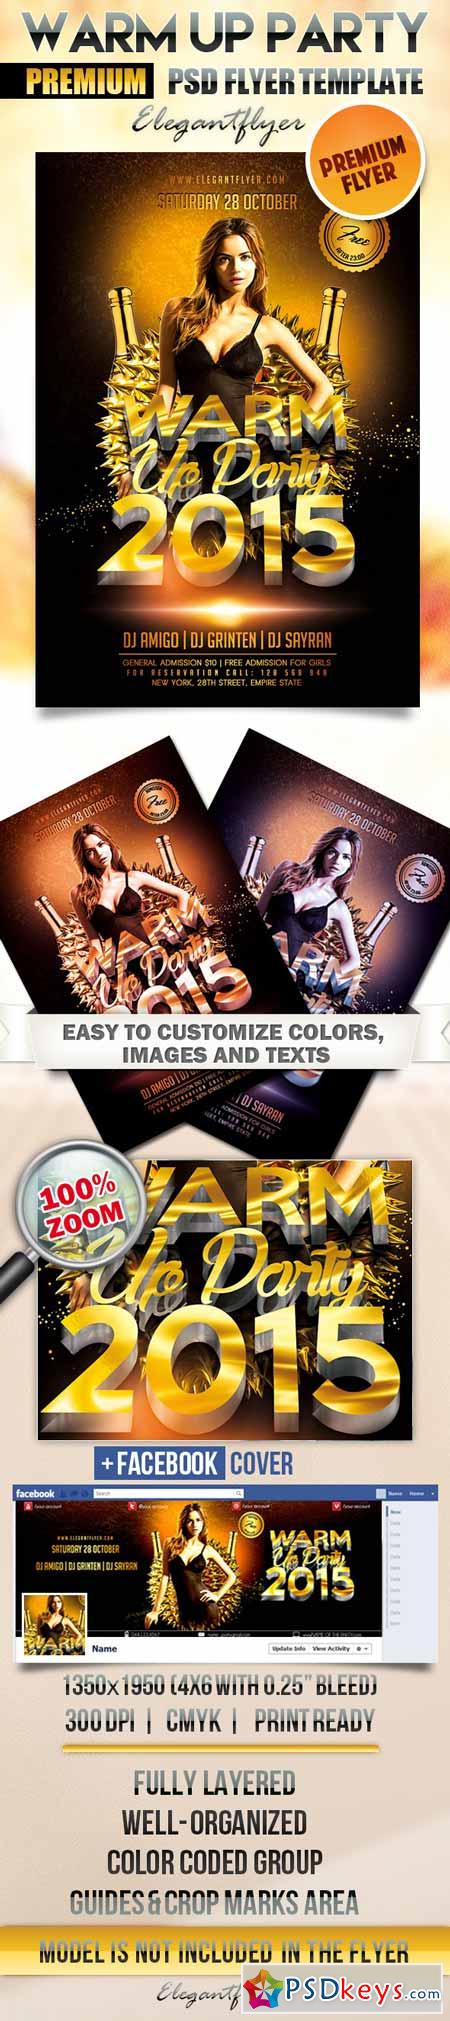 Warm Up Party  Flyer PSD Template + Facebook Cover